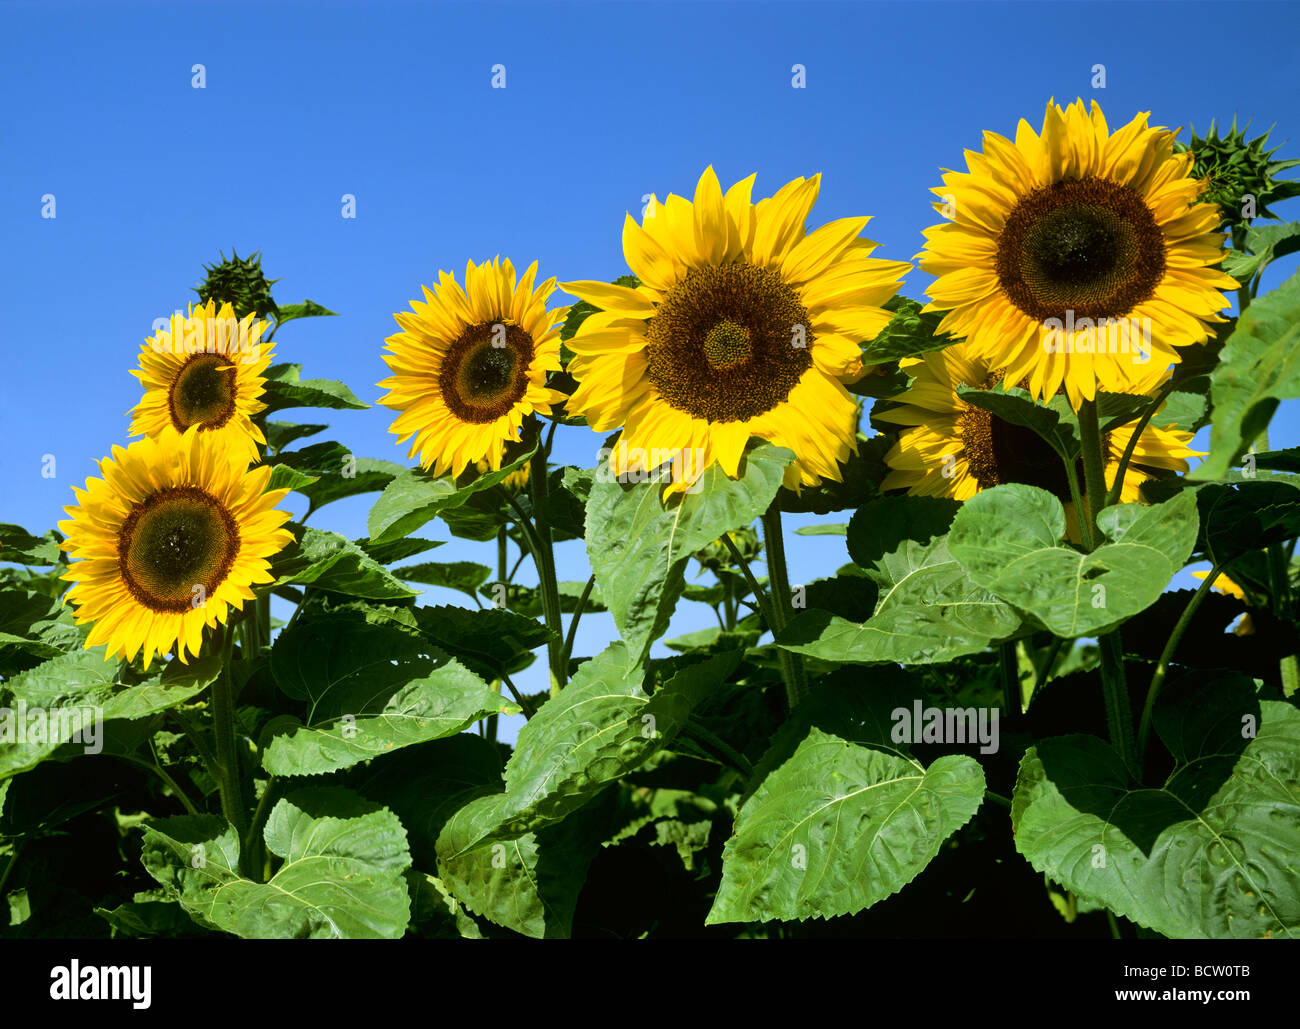 Blossoms of sunflowers (Helianthus annuus), Germany, Europe Stock Photo